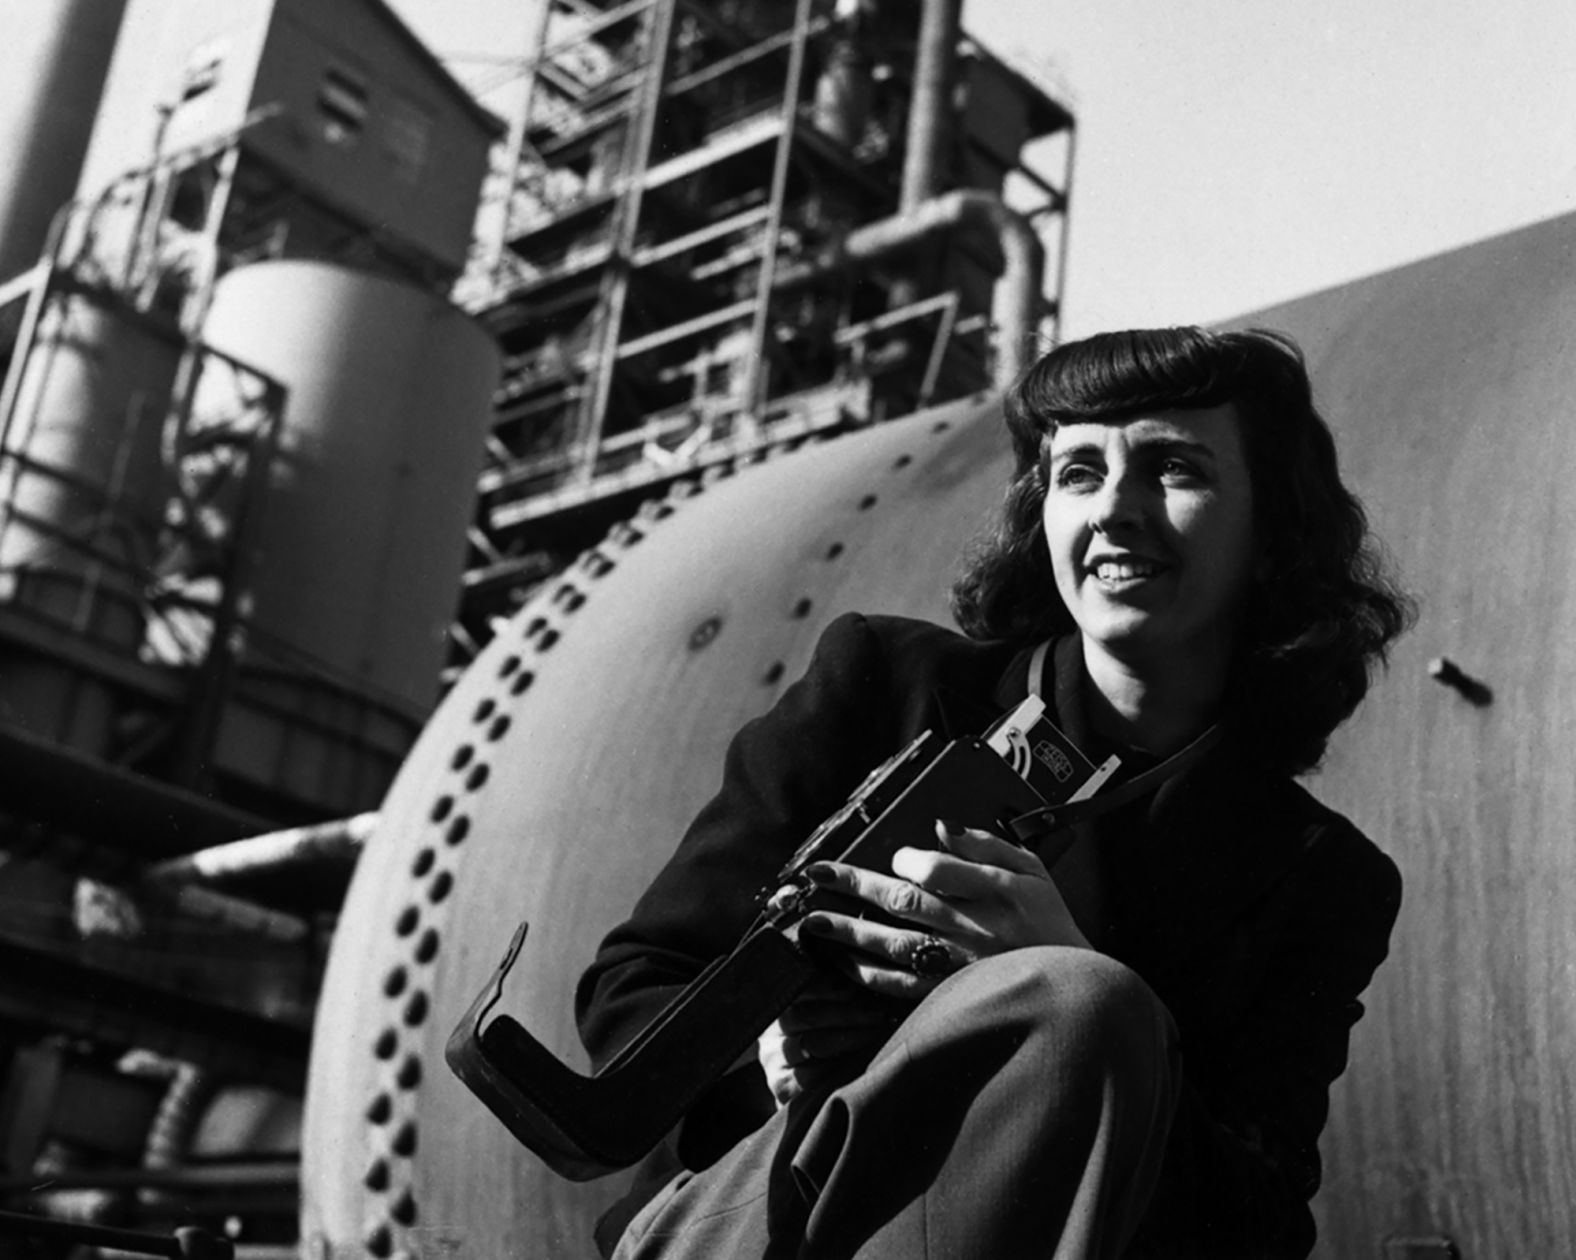 <a href="https://www.estherbubley.com/bio_frame_set.htm" target="_blank" target="_blank">Esther Bubley</a>, seen here in 1944, started her career by documenting American life at home during World War II. She then traveled the world during the "golden age" of photojournalism, photographing stories for prominent magazines such as Life and Ladies' Home Journal. "Bubley approached her assignments with genuine curiosity, creating probing and enduring portrayals of ordinary lives," according to the <a href="https://nmwa.org/explore/artist-profiles/esther-bubley" target="_blank" target="_blank">National Museum of Women in the Arts</a>.